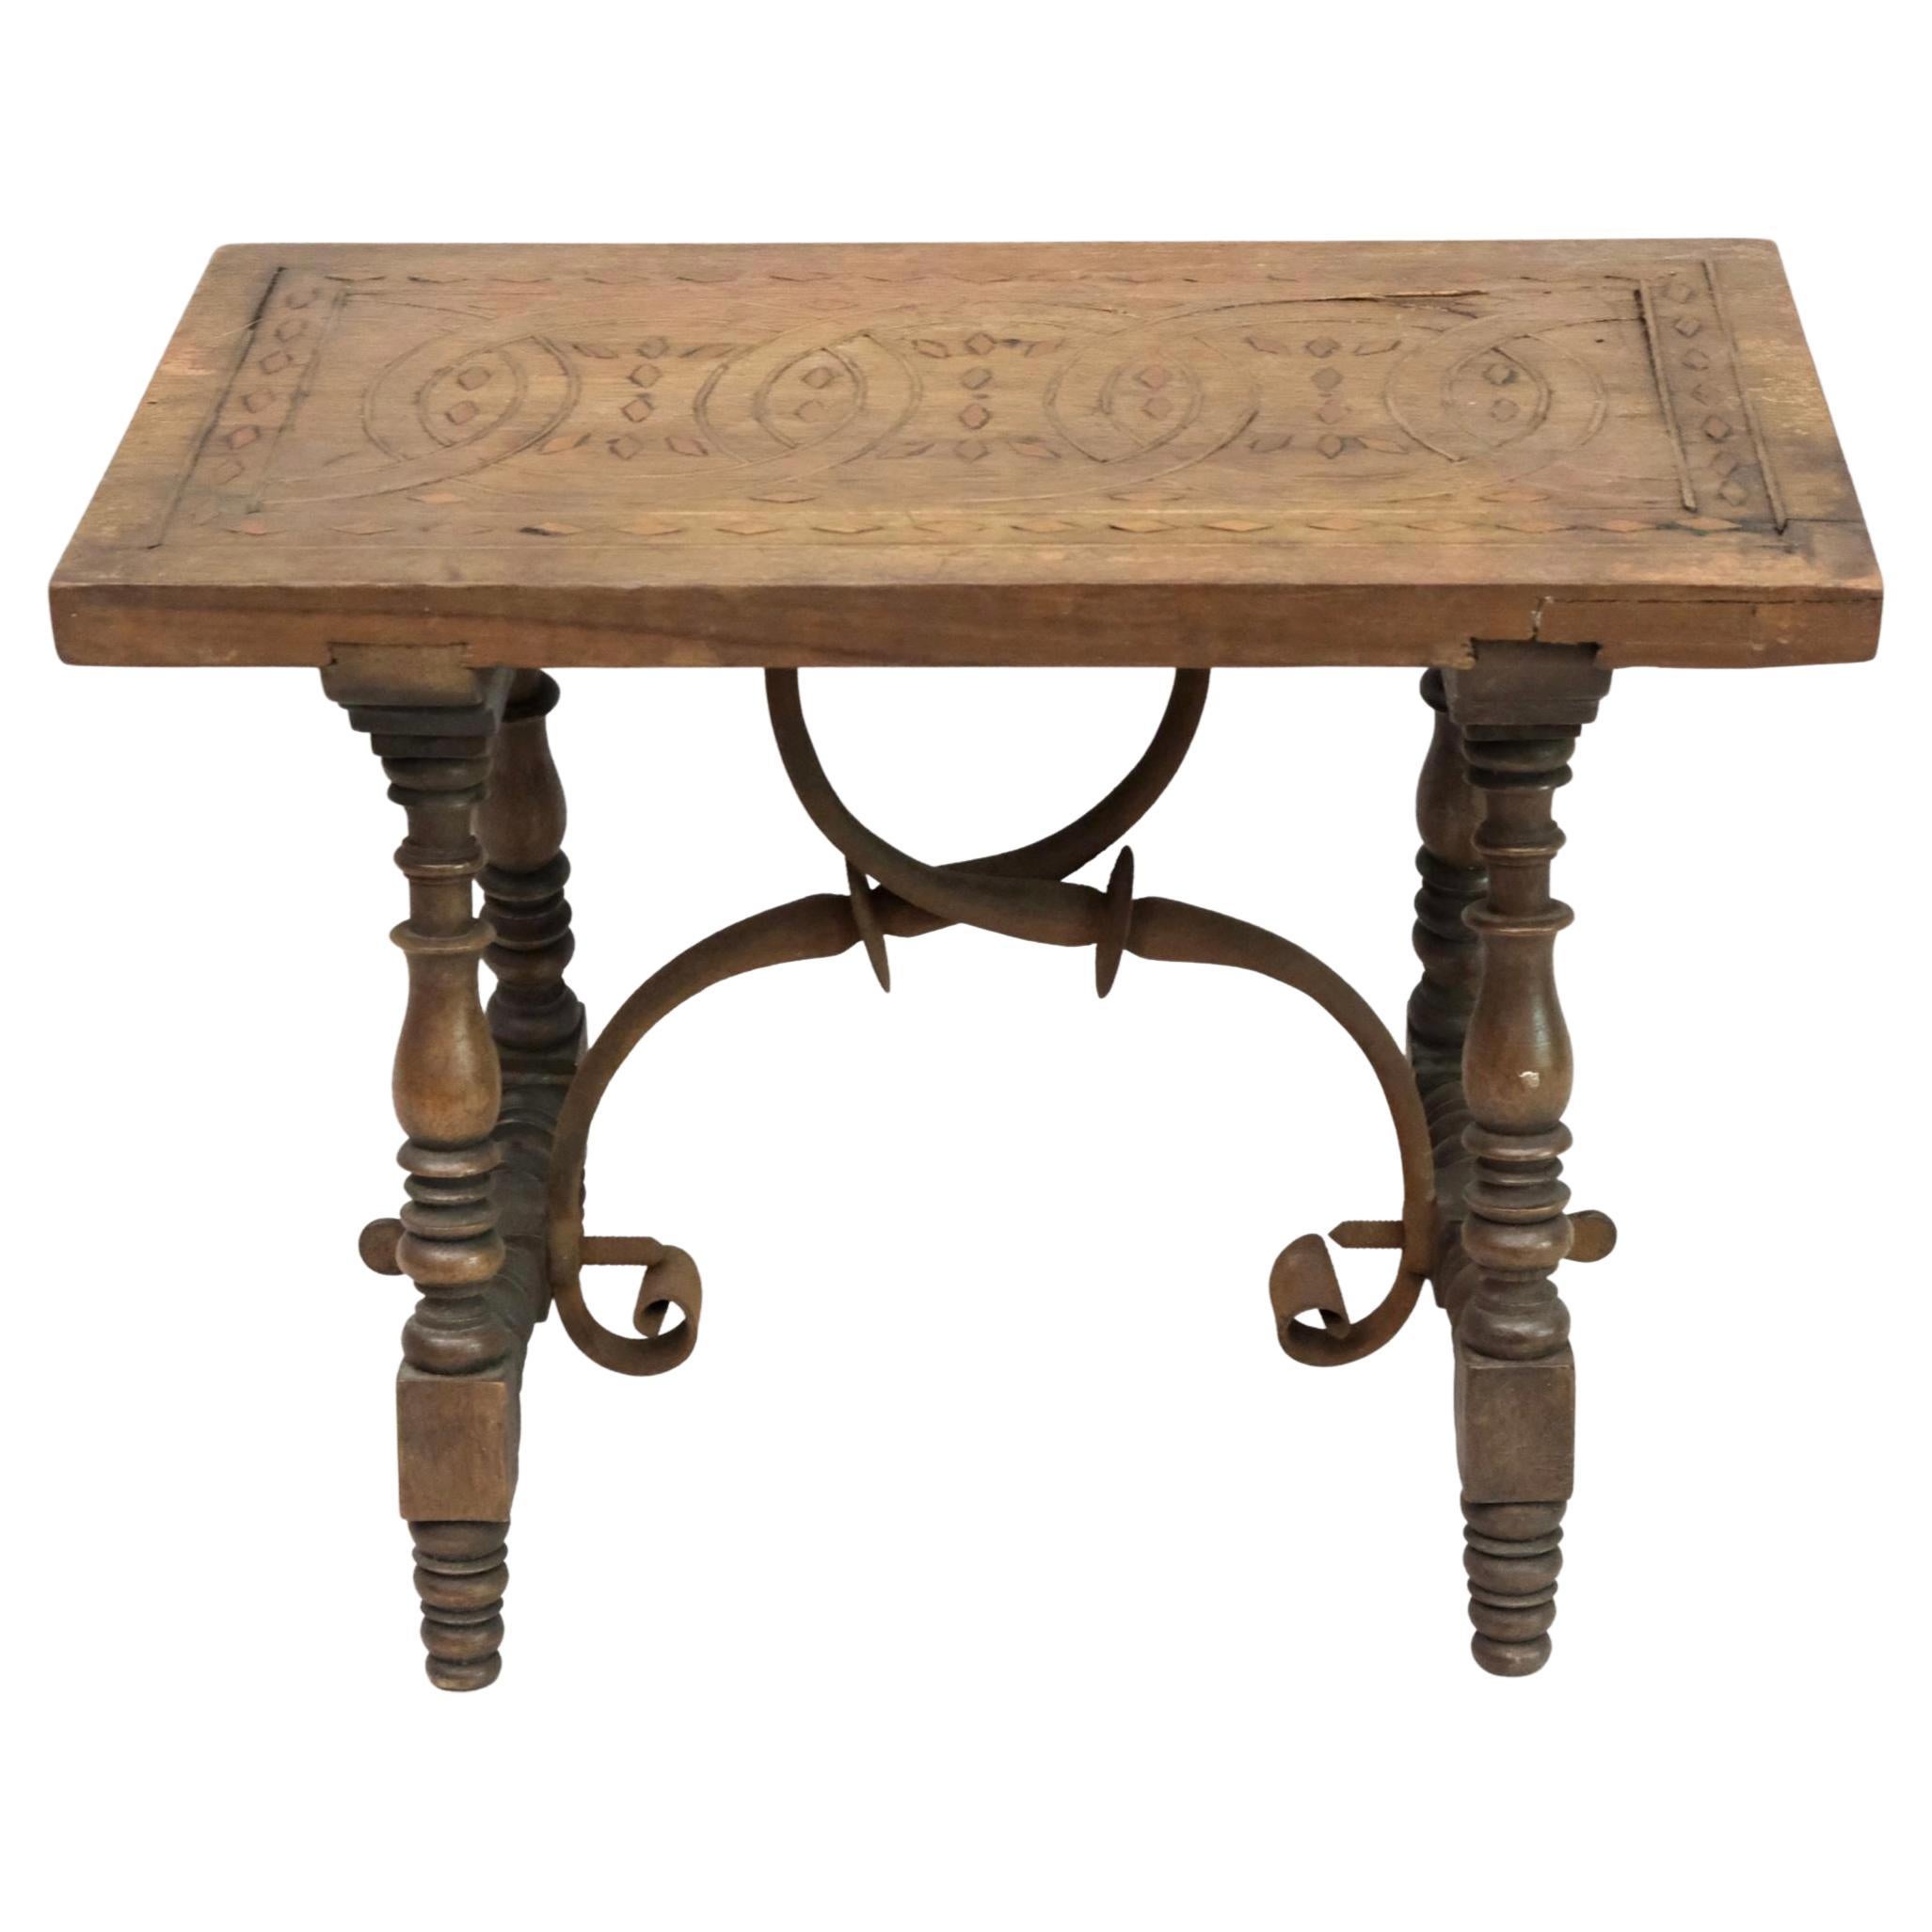 A unique Gothic style small stool with decorative carved wood top, elaborately turned legs and hand forged metal support 7